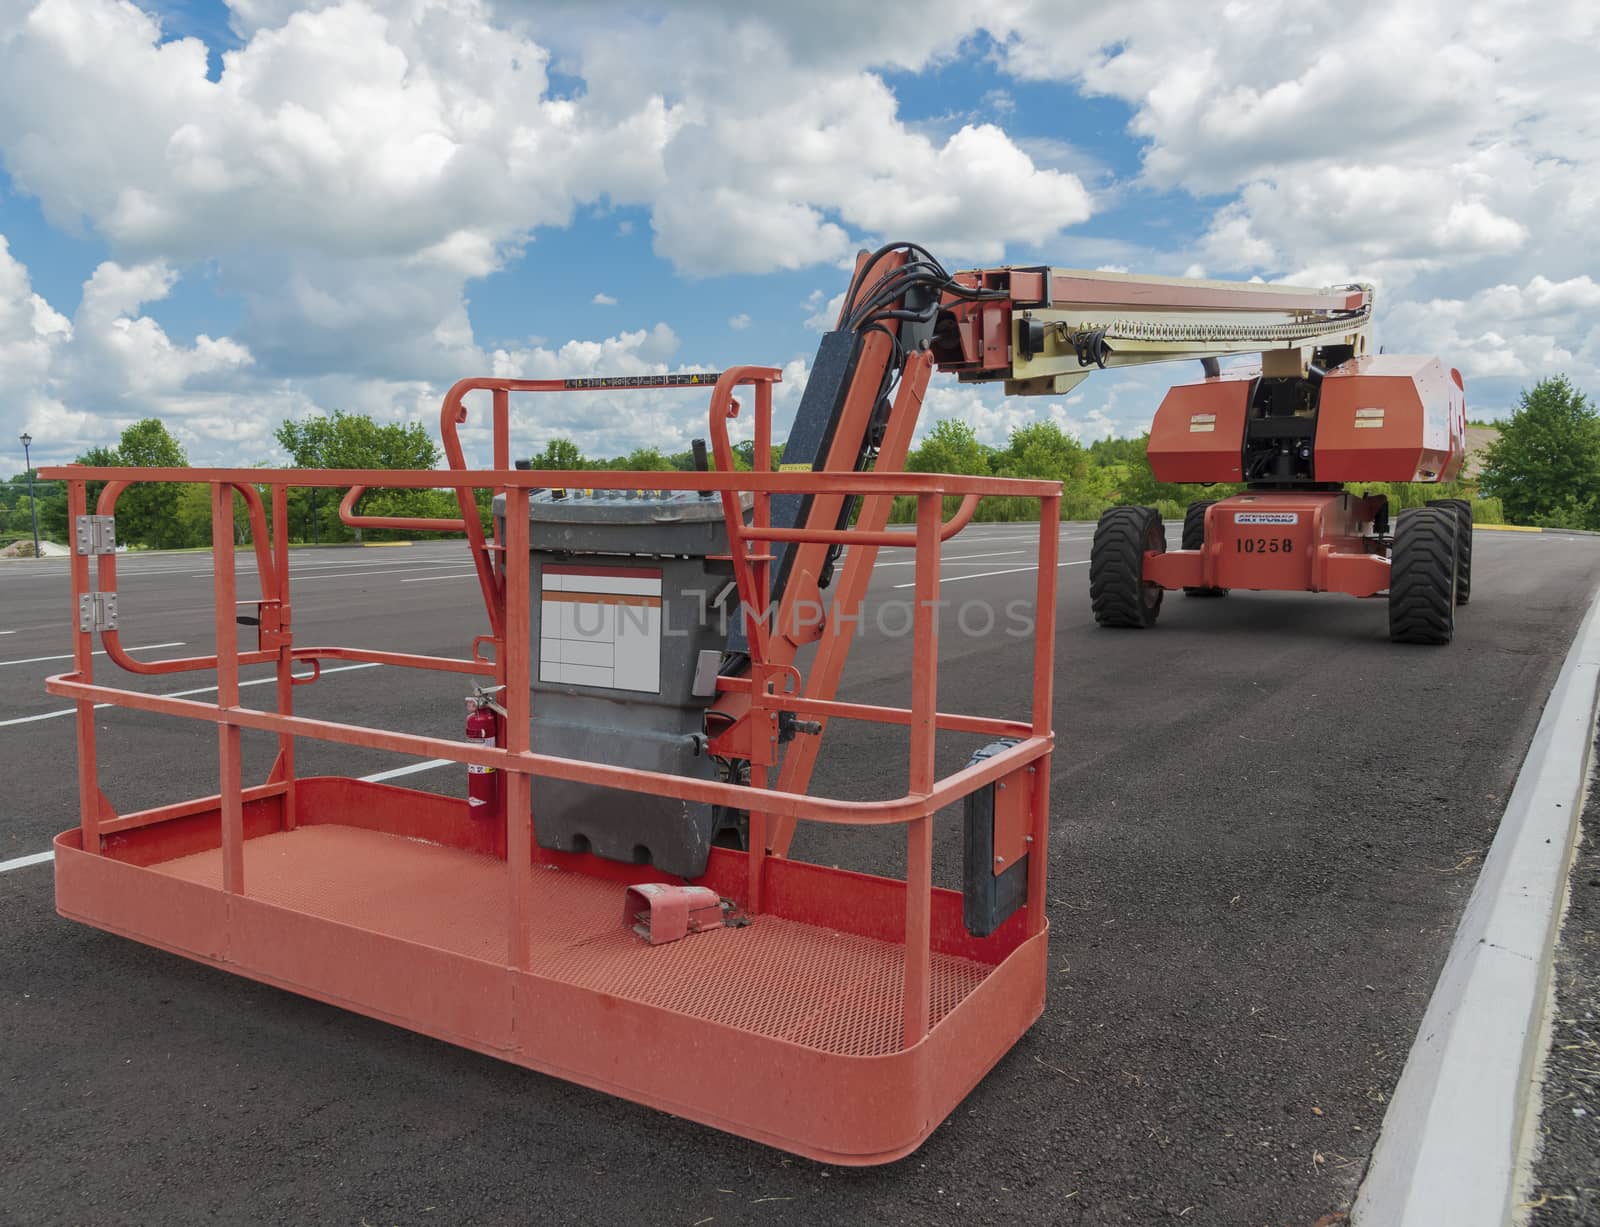 Generic Unbranded Boom Lift From The Front by stockbuster1